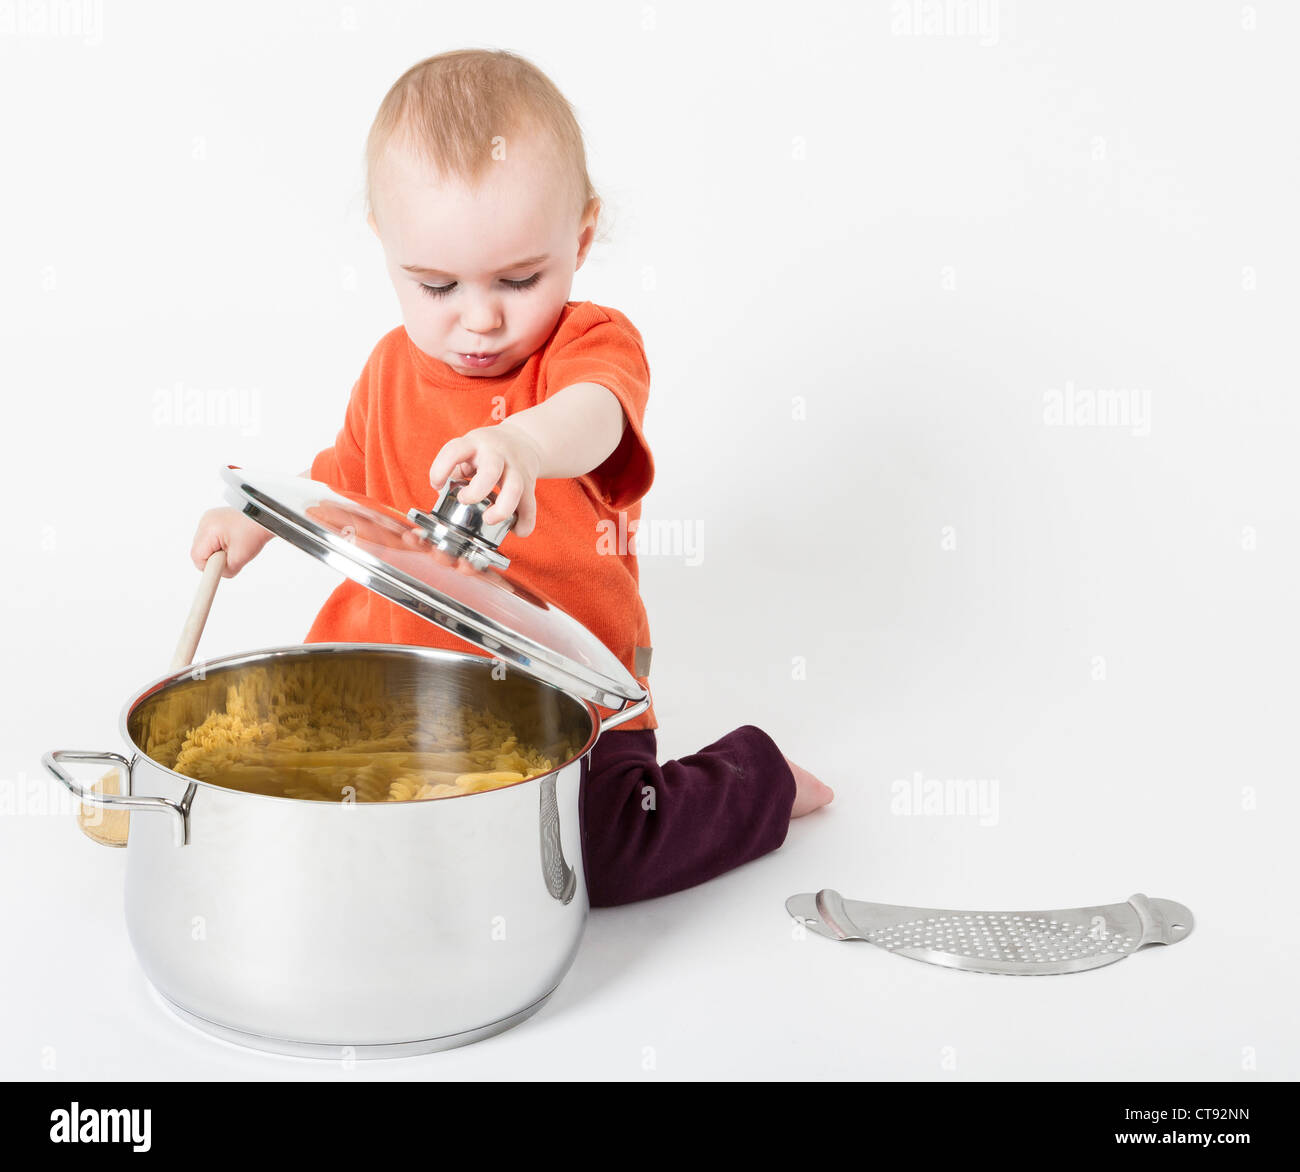 baby with big cooking pot in neutral grey background Stock Photo